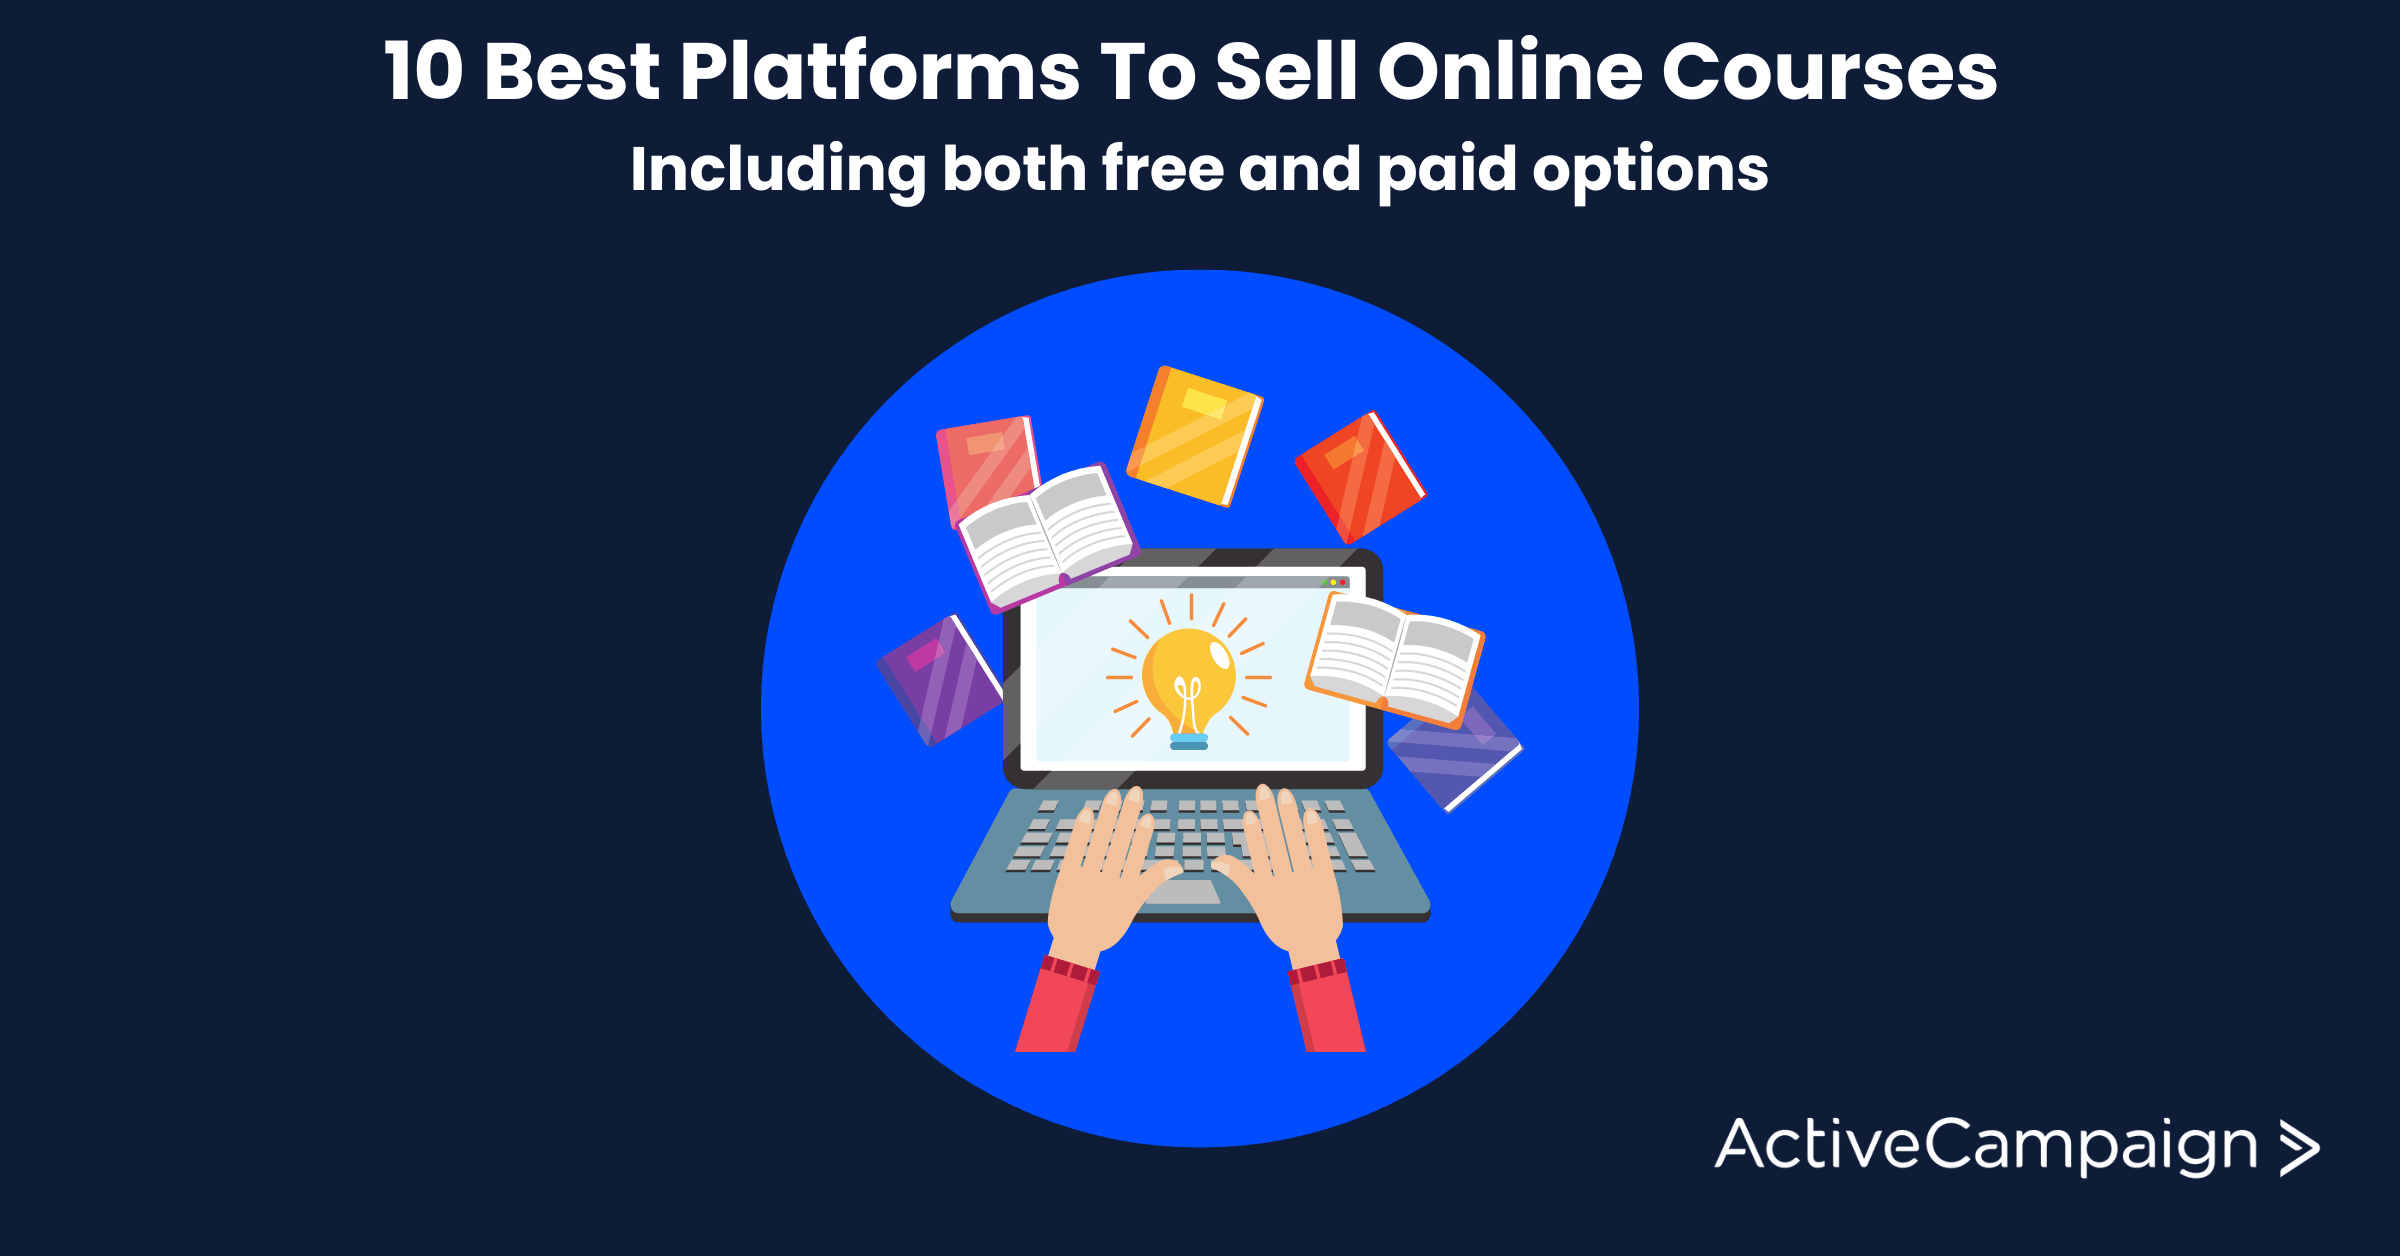 10 Best Platforms To Sell Online Courses (Including Both Free And Paid Options)